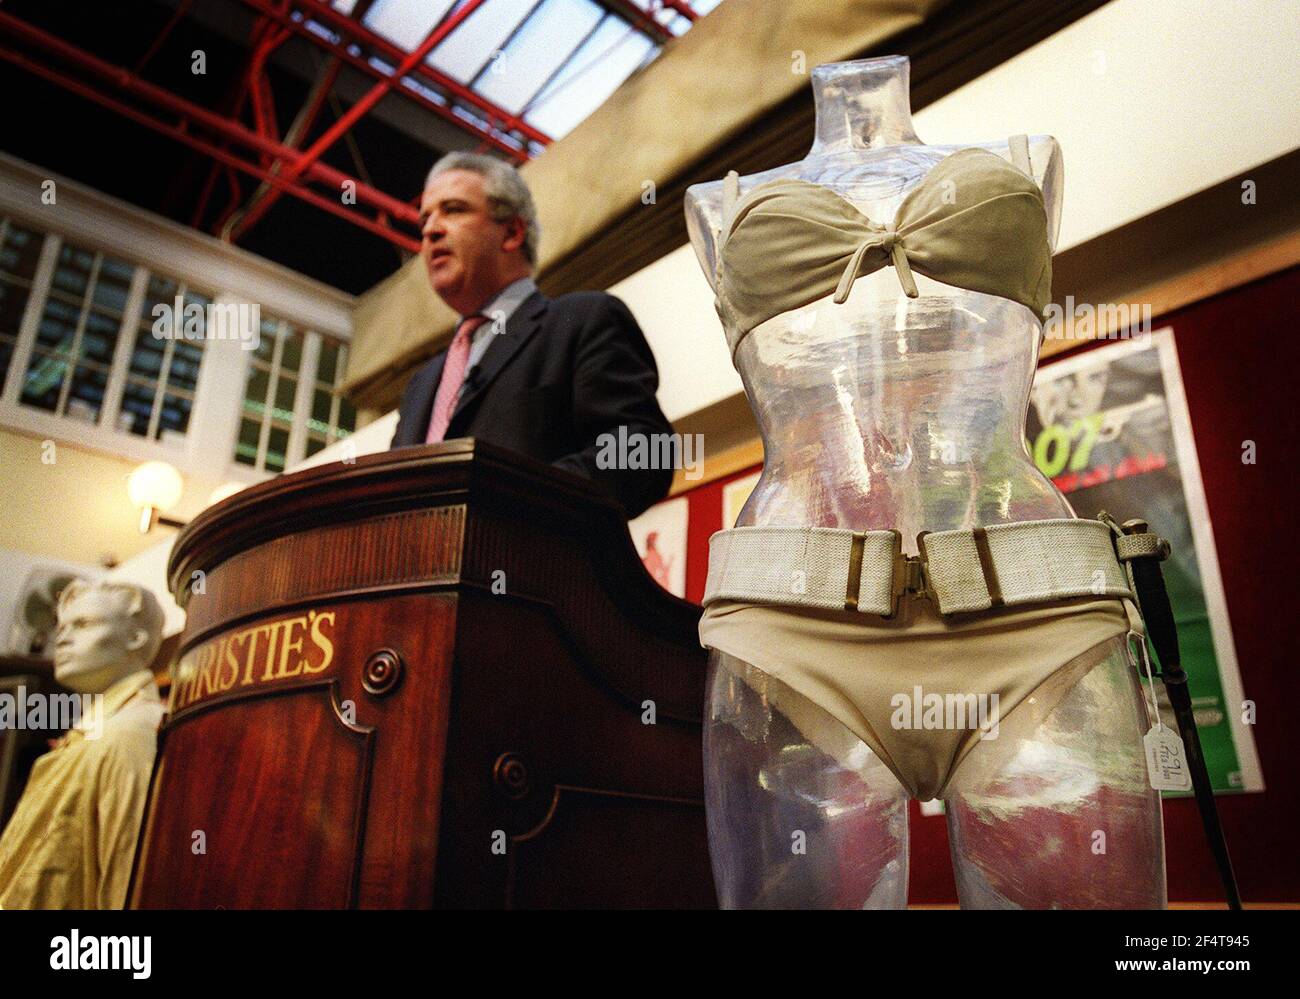 THE BIKINI WORN BY URSULA ANDRESS IN THE FIRST BOND FILM 'DR. NO'. THE ITEM WENT UNDER THE HAMMER TODAY AS PART OF THE JAMES BOND AUCTION AND WAS ONE OF THE MAIN HIGHLIGHTS OF THE SALE.14 February 2001 PHOTO ANDY PARADISE Stock Photo